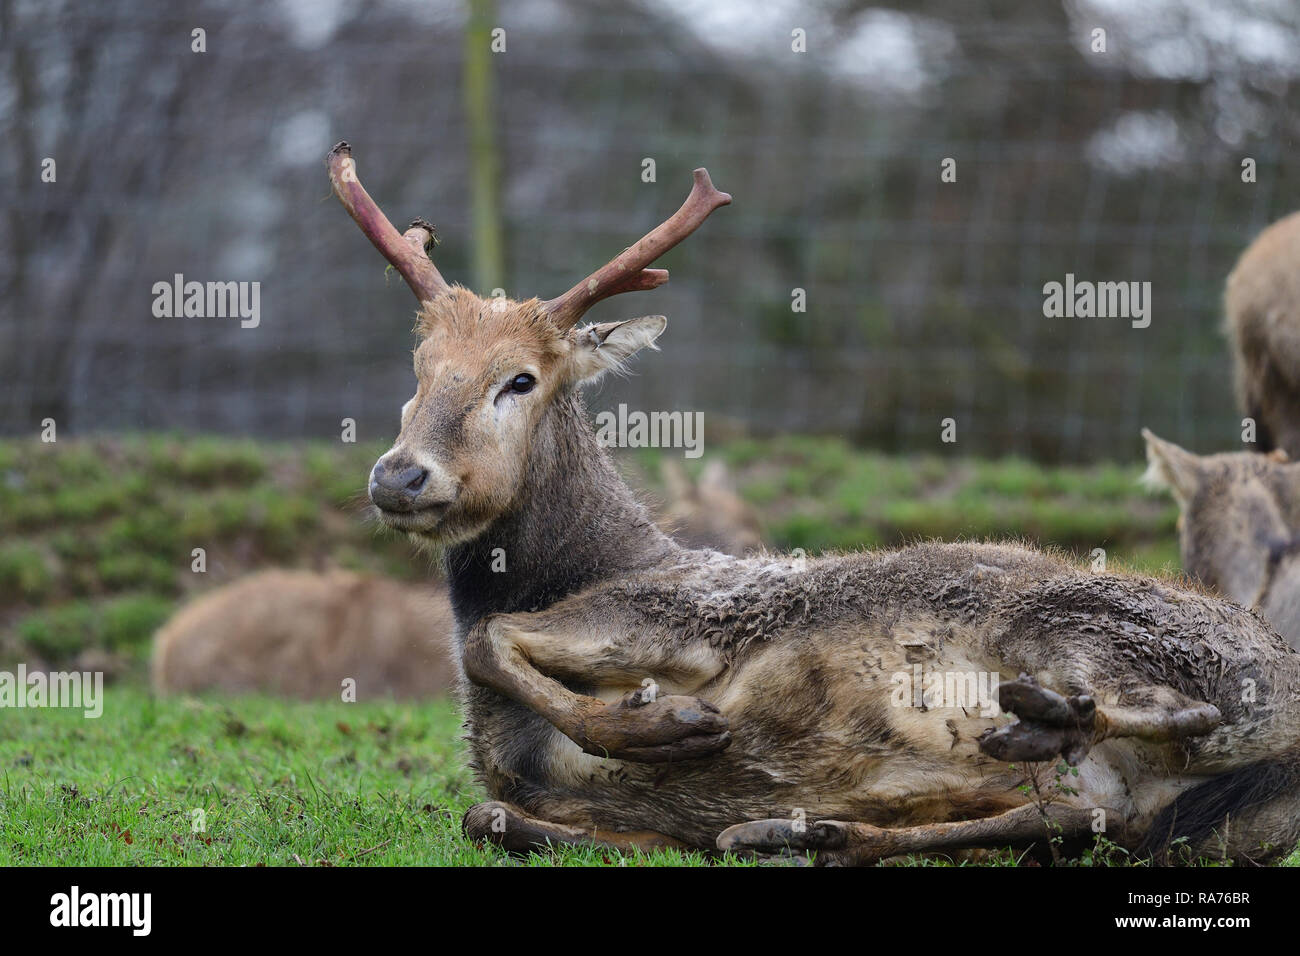 Low angle view of a Pere David's deer (elaphurus davidianus) lying on the ground Stock Photo